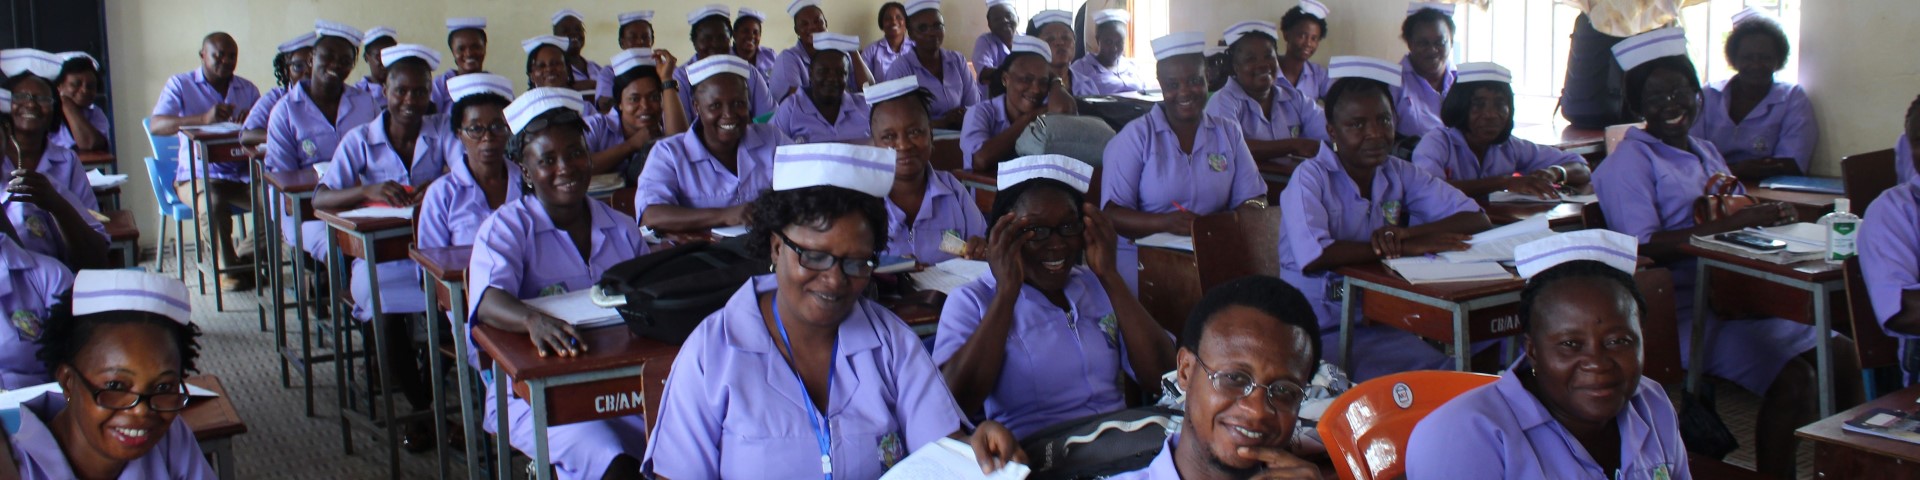 Healthcare workers sit in a classroom during a training session.